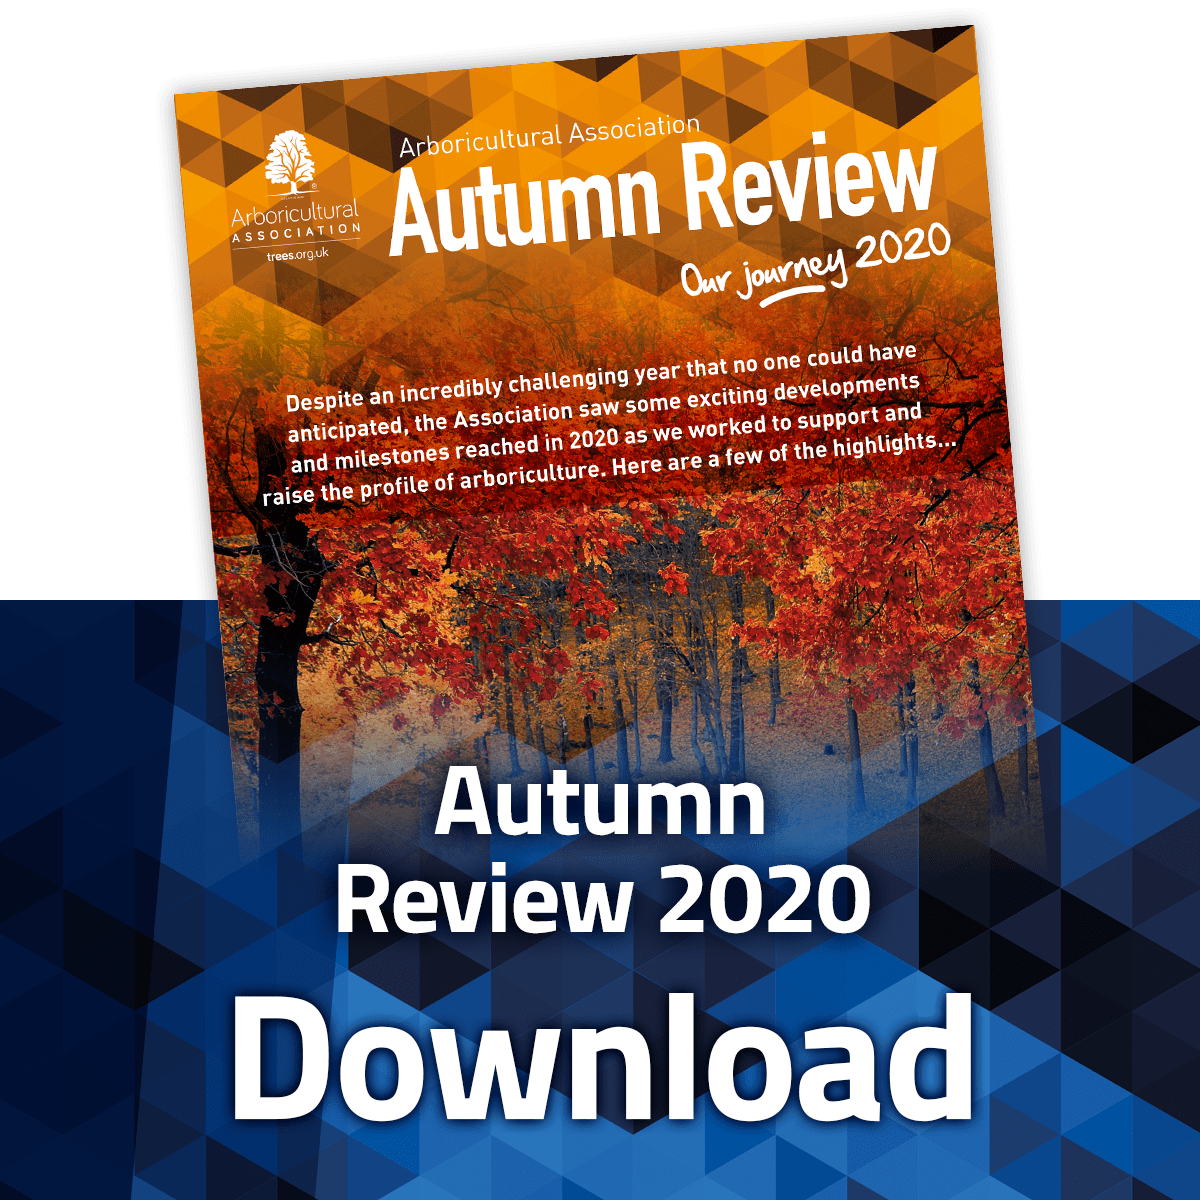 Download the 2020 Autumn Review